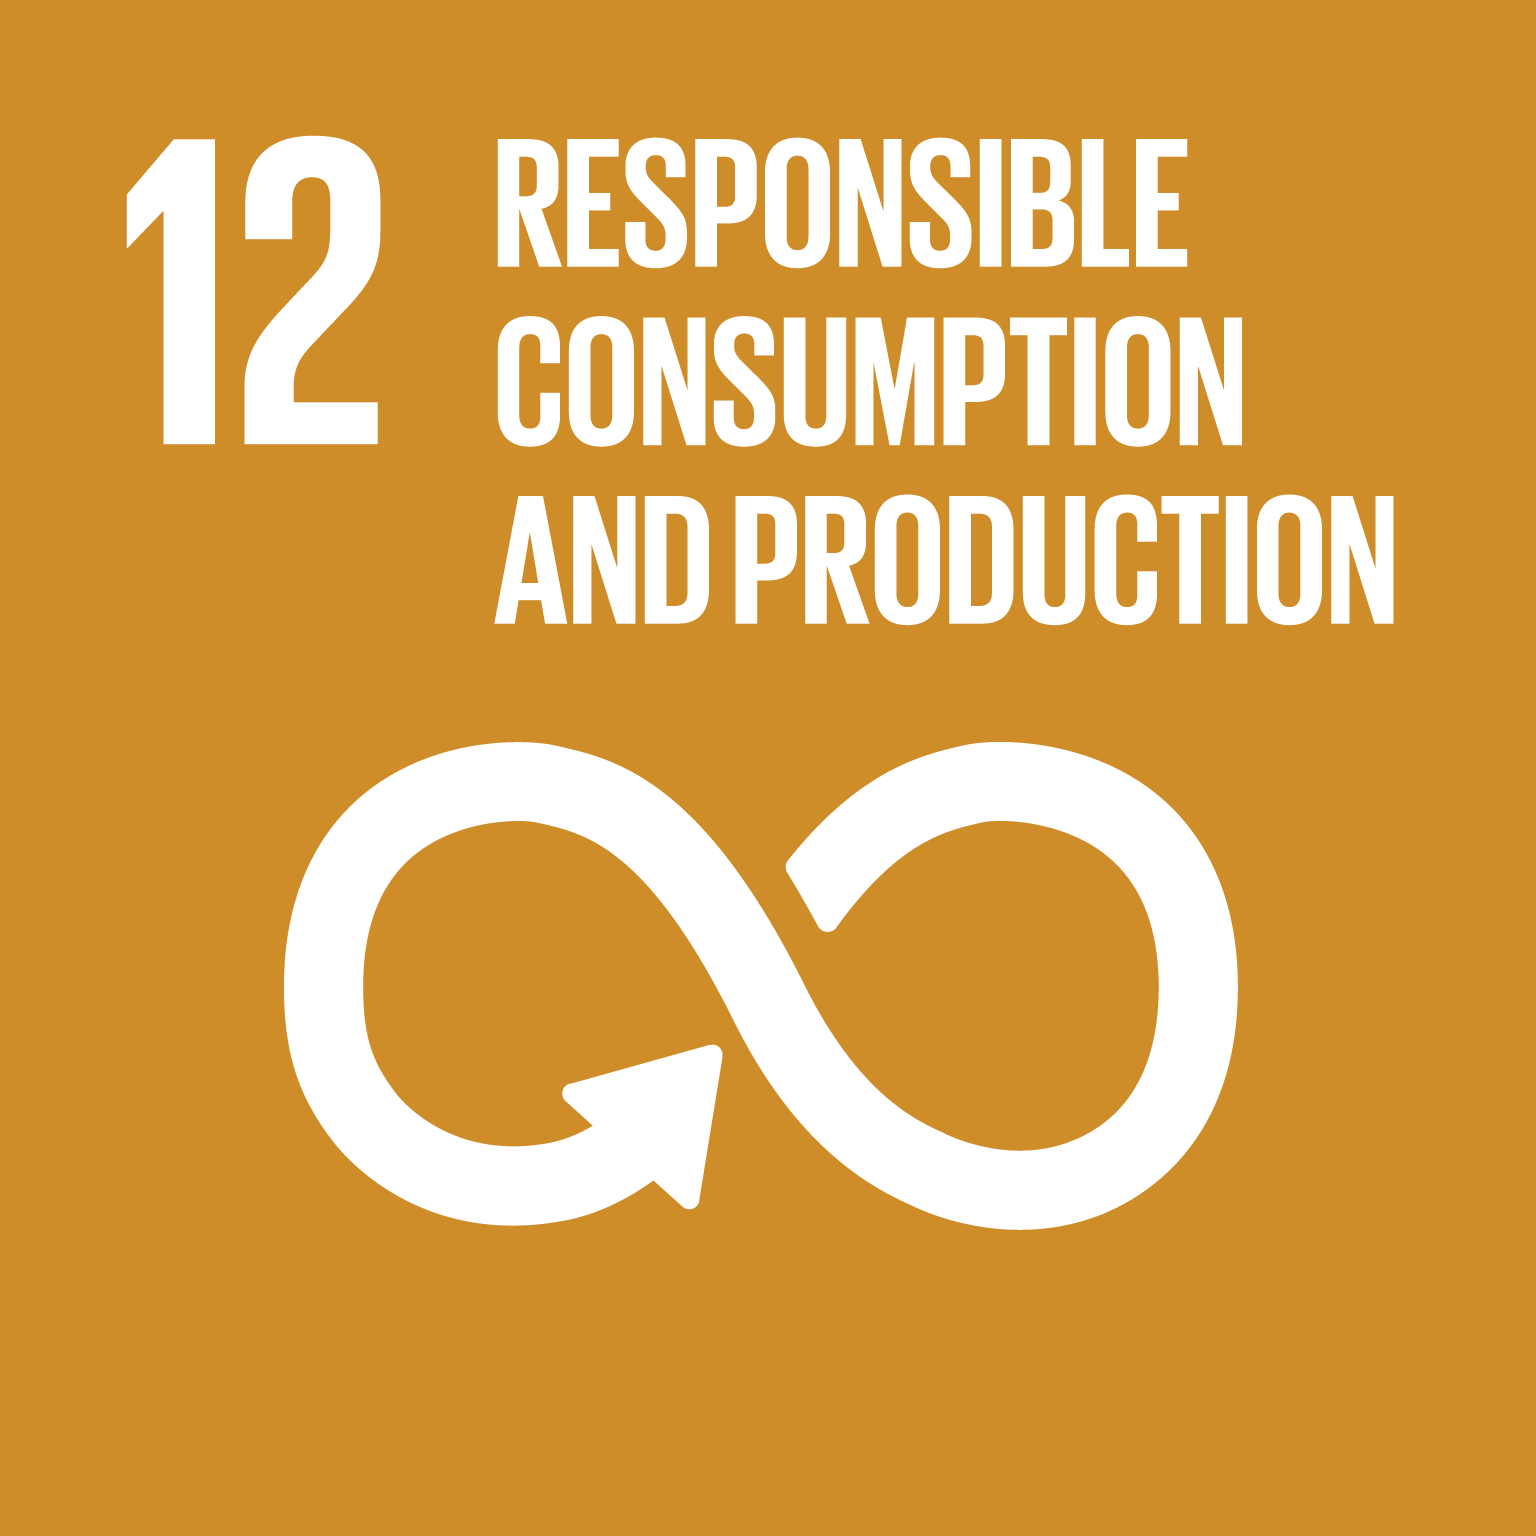 Goal 12 - Responsible Consumption And Production